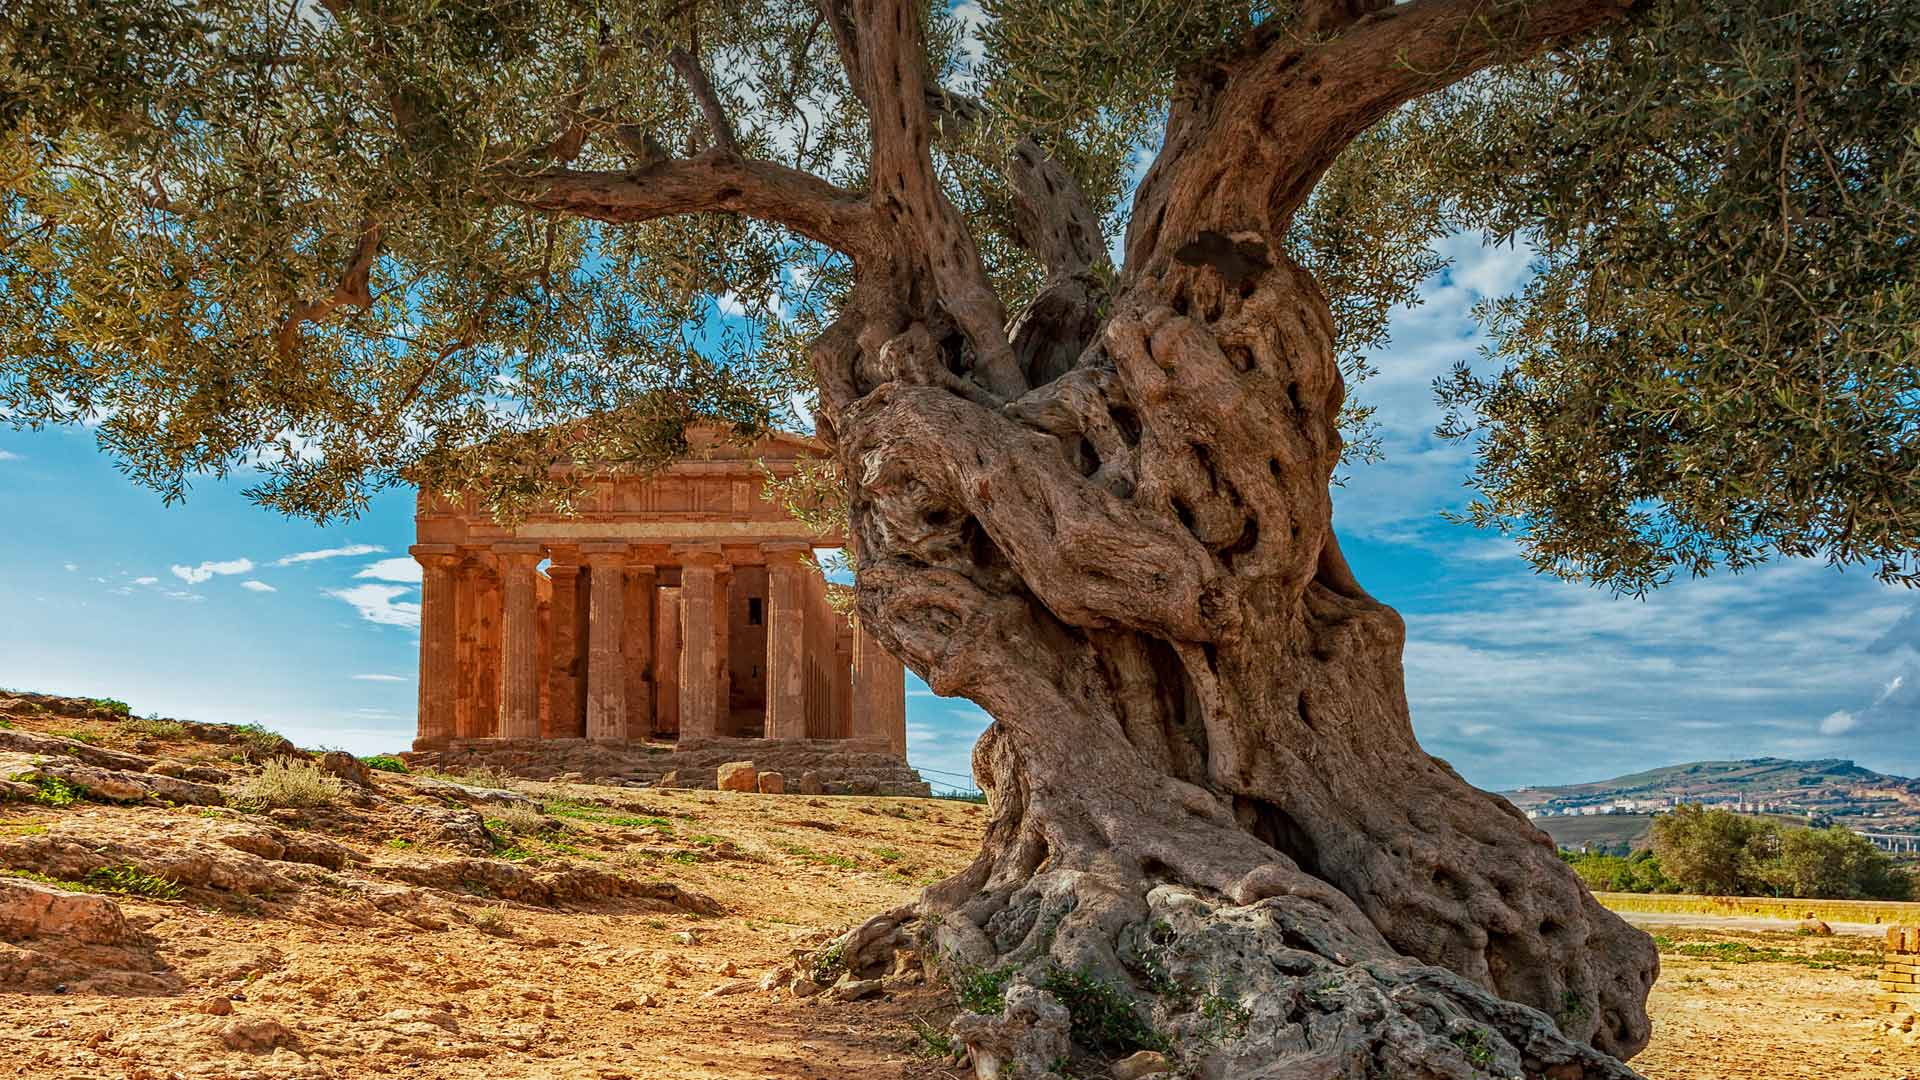 An olive tree in front of the Temple of Concordia on the island of Sicily, Italy - Alfio Finocchiaro/Shutterstock)